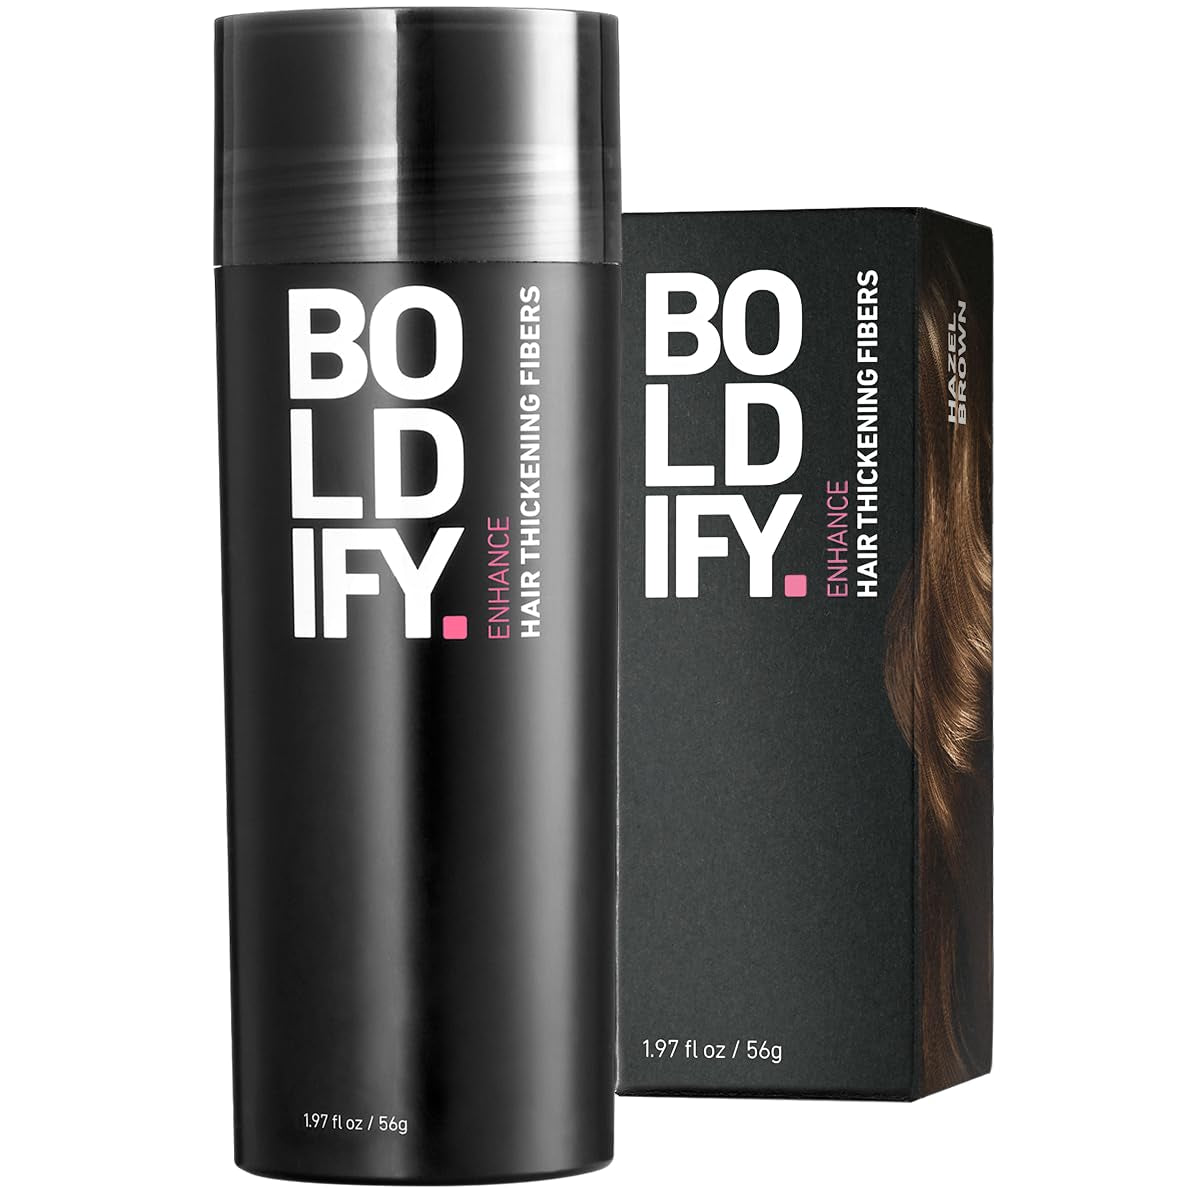 BOLDIFY Hair Fibers (56G) Fill in Fine and Thinning Hair for an Instantly Thicker & Fuller Look - Best Value & Superior Formula -14 Shades for Women & Men - DARK BROWN